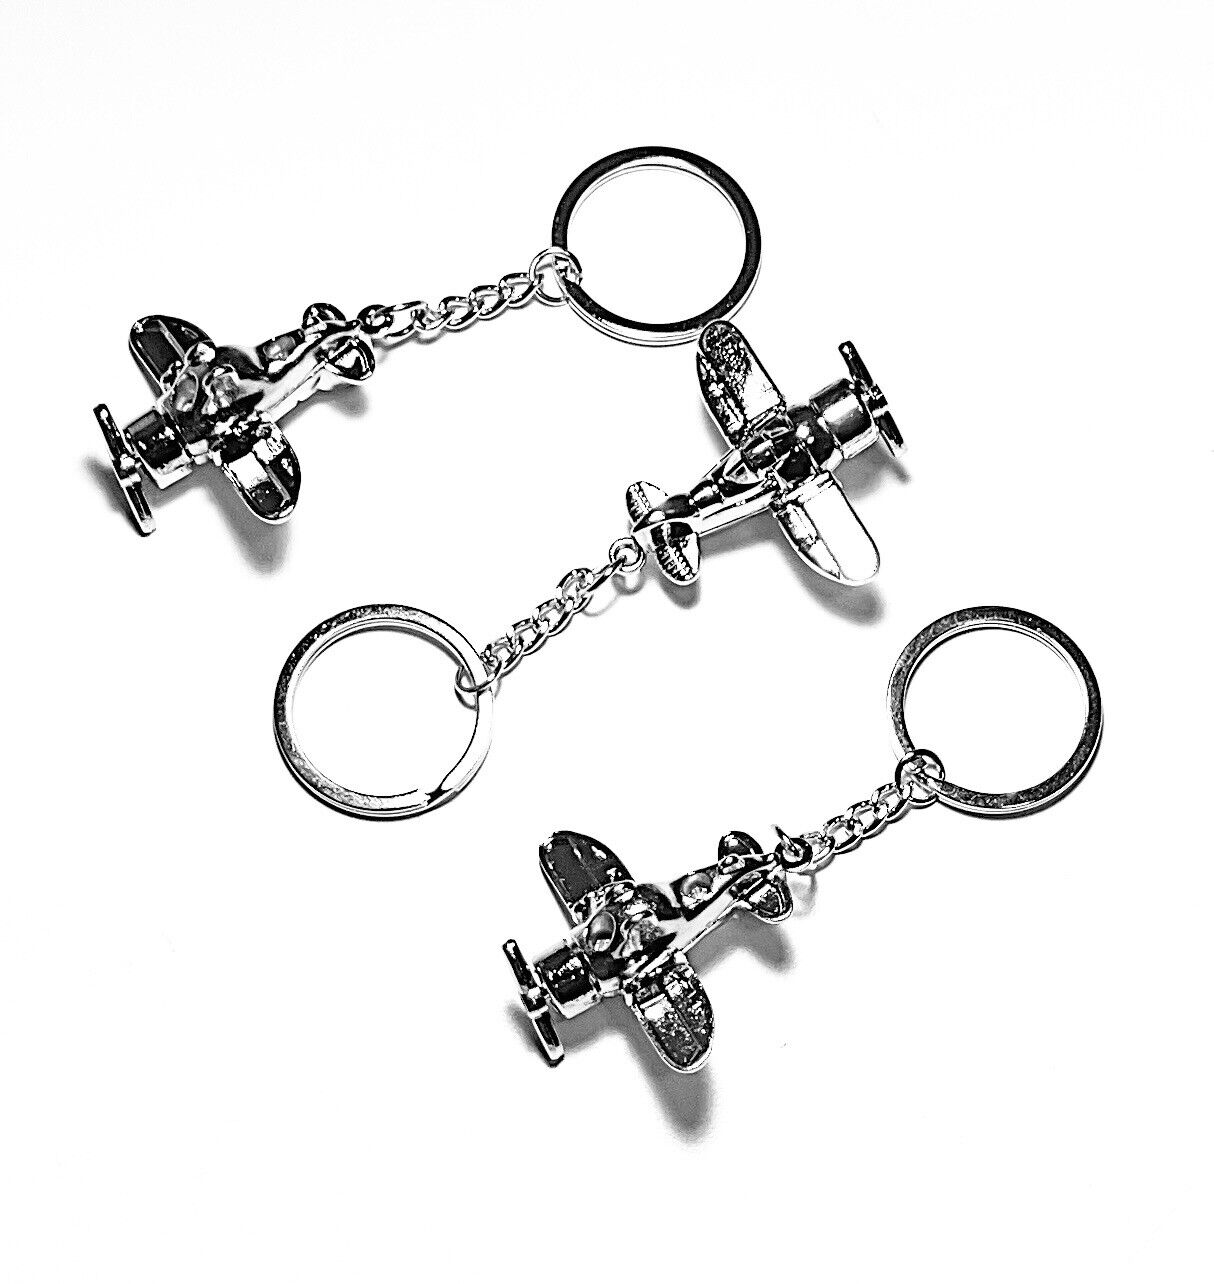 3 PACK 3D  Airplane Model Keychain Key Ring Creative Aircraft